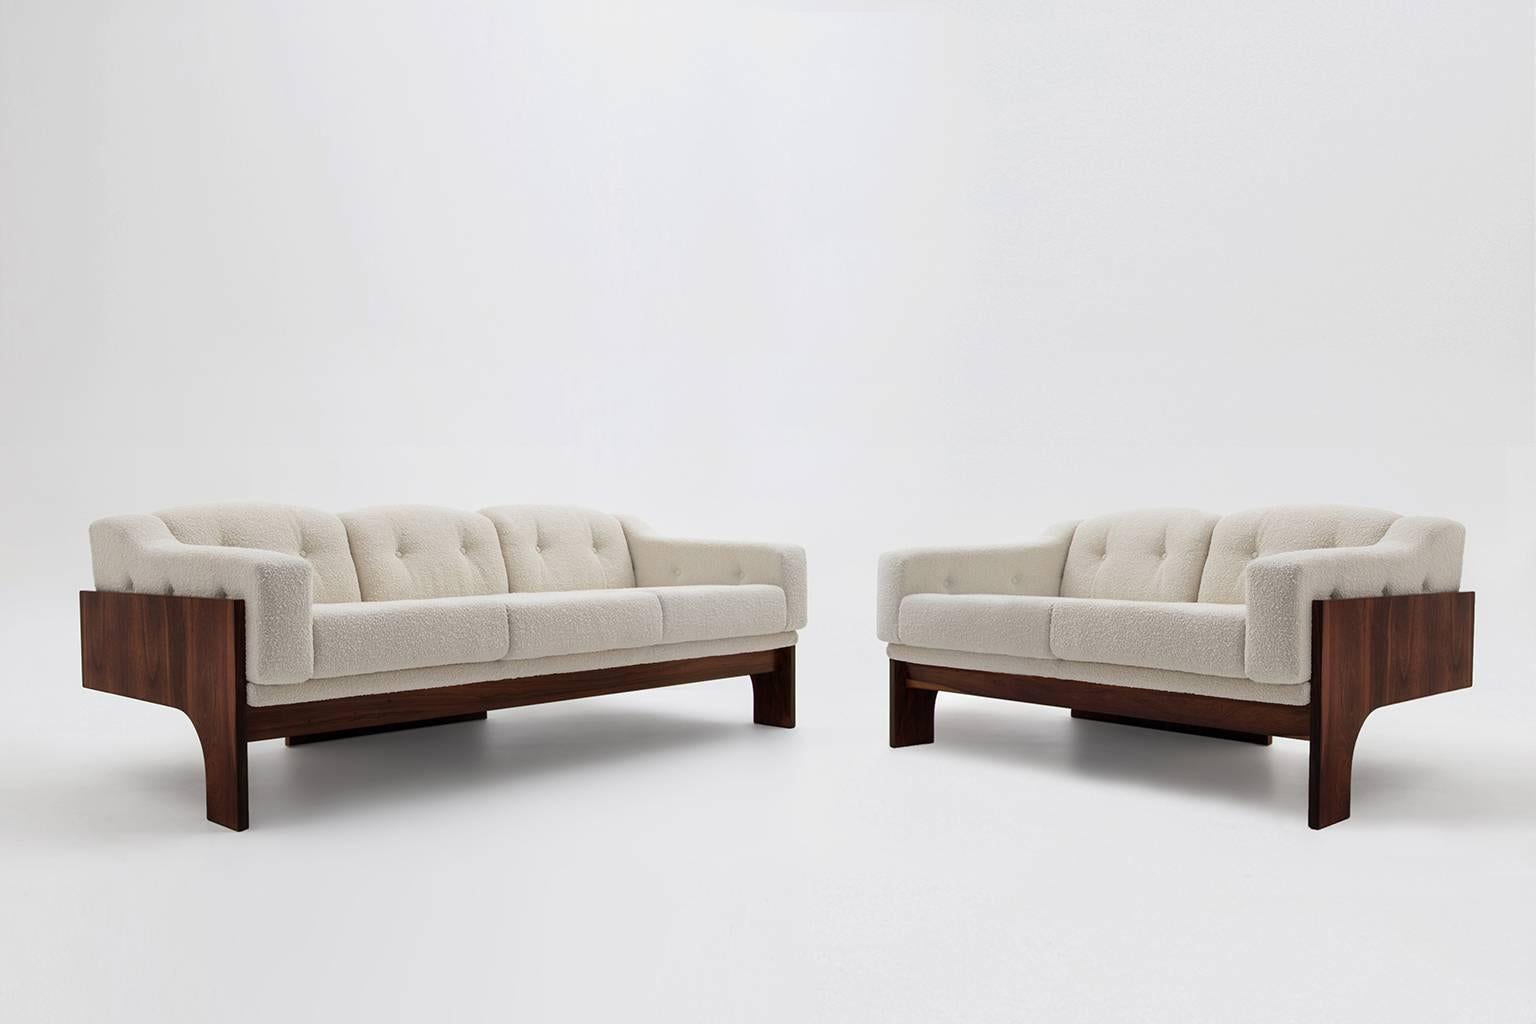 Oriolo sofa set by Claudio Salocchi for Sormani, Italy 1966.
Exceptional design made out of fine Brazilian Rosewood with a beautiful warm woodgrain. All fully restored; cushions are reupholstered with a off white Bouclé fabric from the collection of